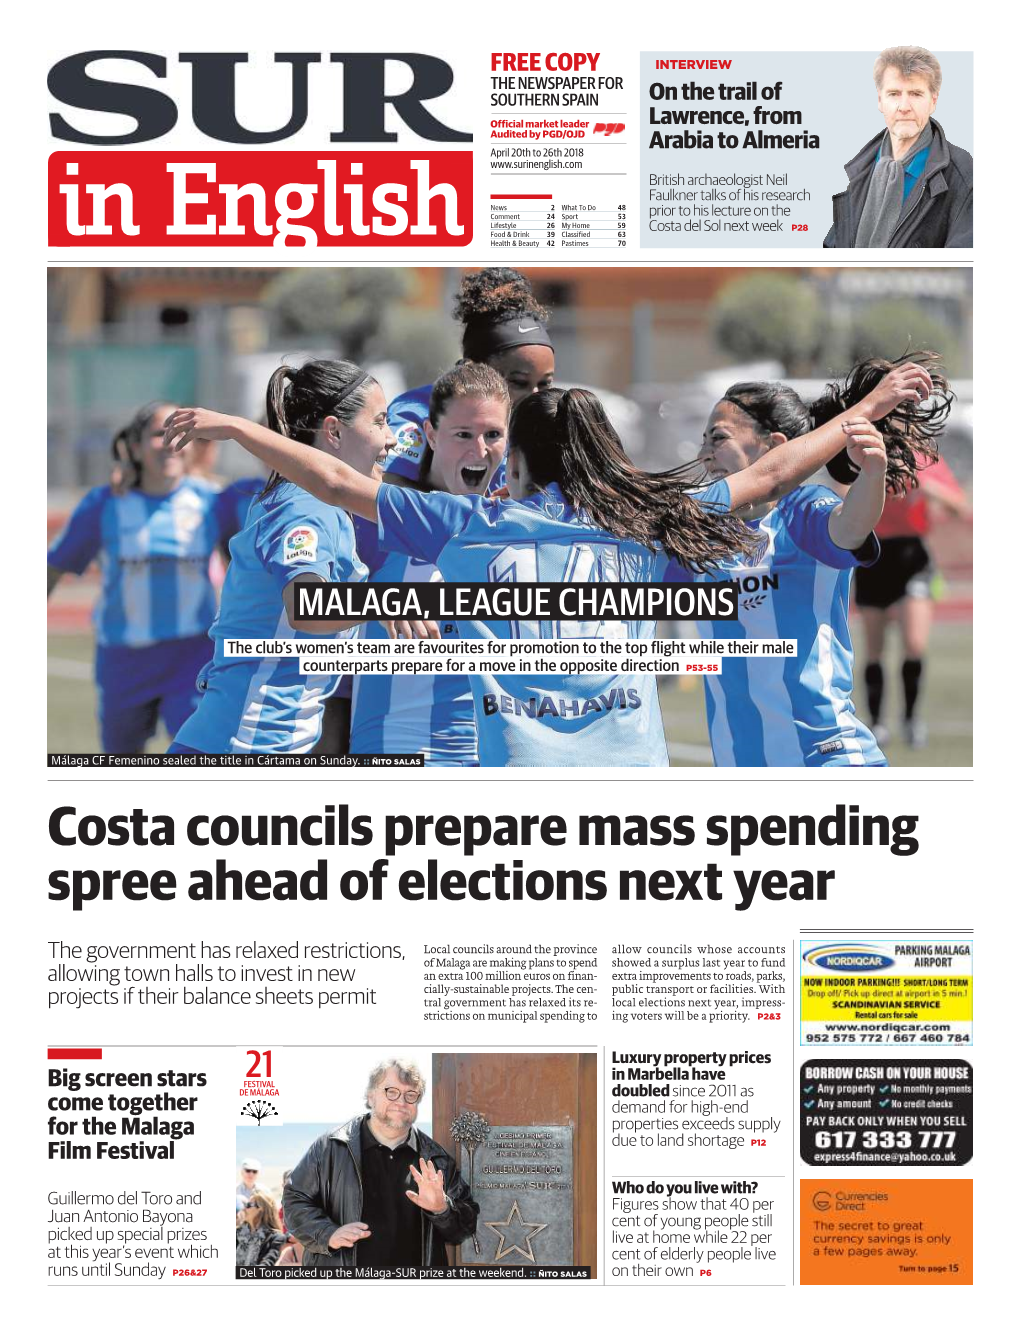 Costa Councils Prepare Mass Spending Spree Ahead of Elections Next Year